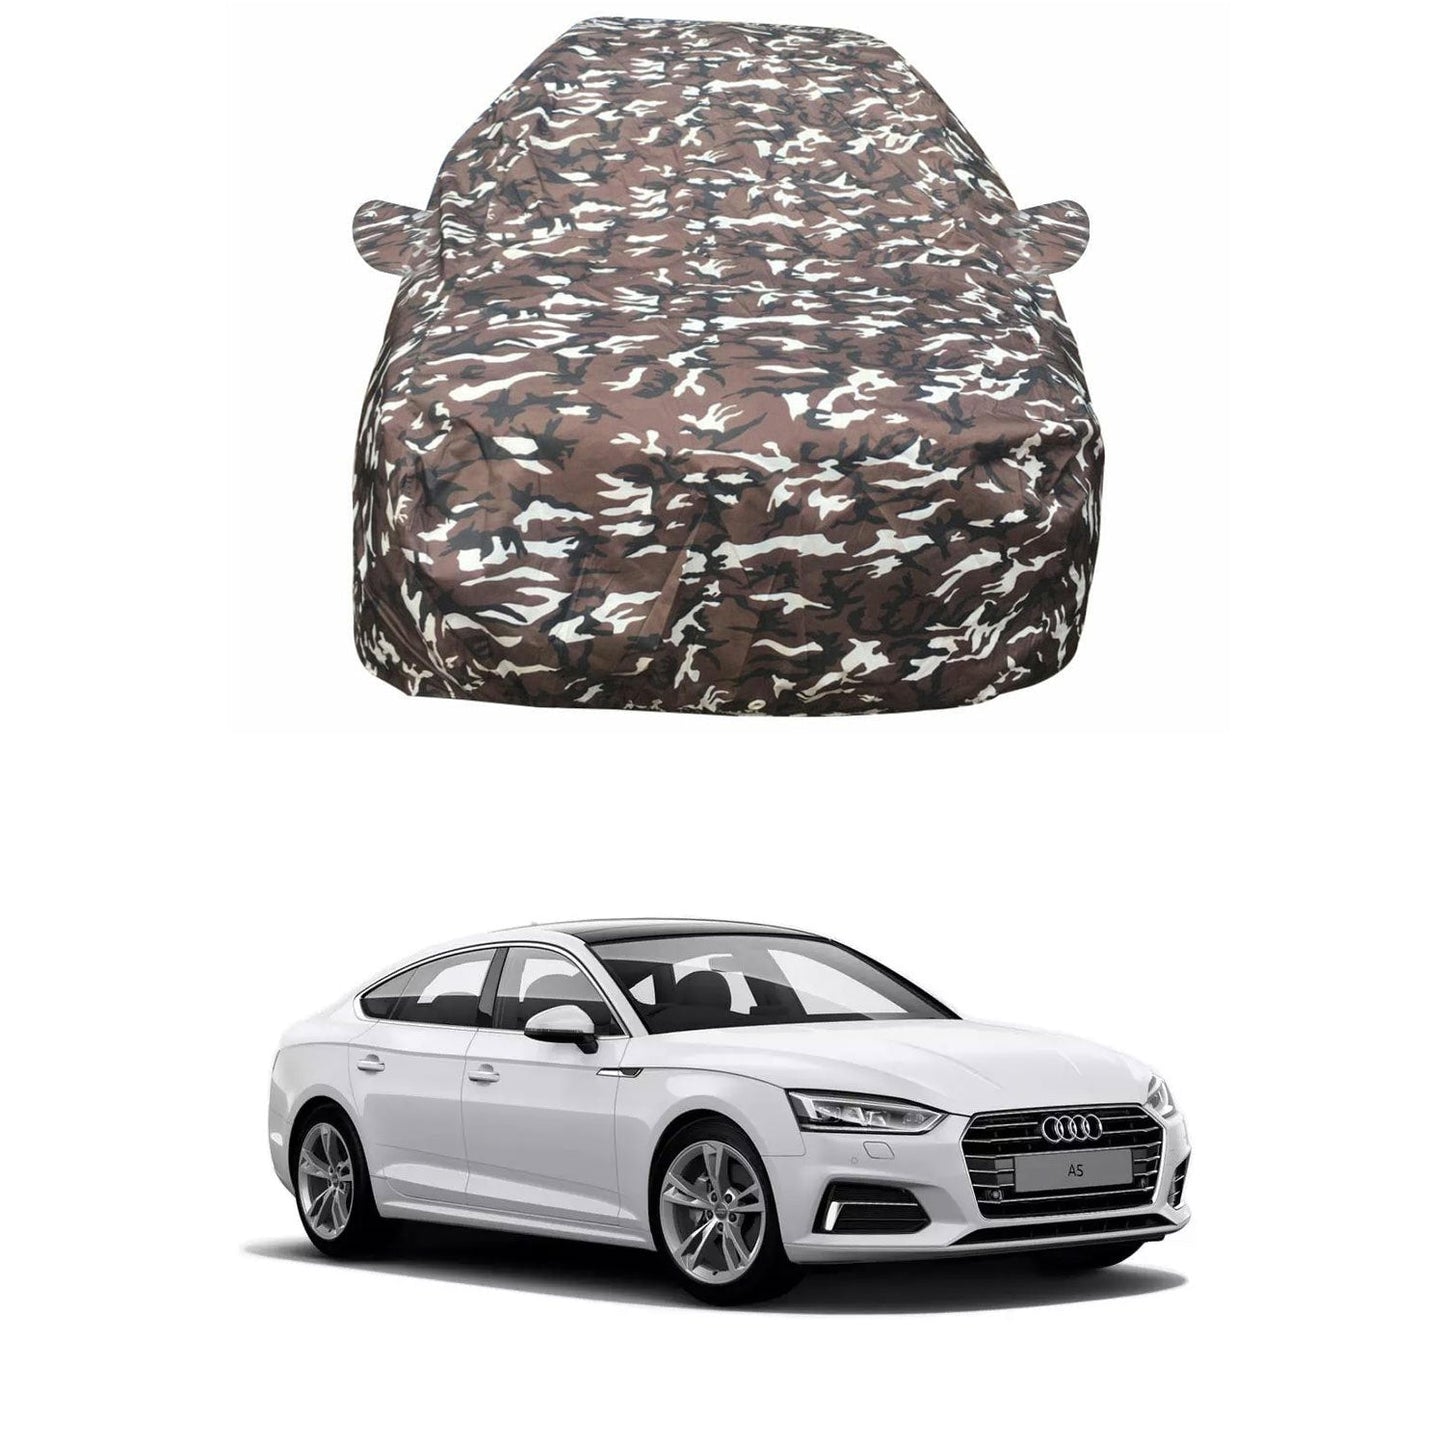 Oshotto Ranger Design Made of 100% Waterproof Fabric Car Body Cover with Mirror Pocket For Audi A5